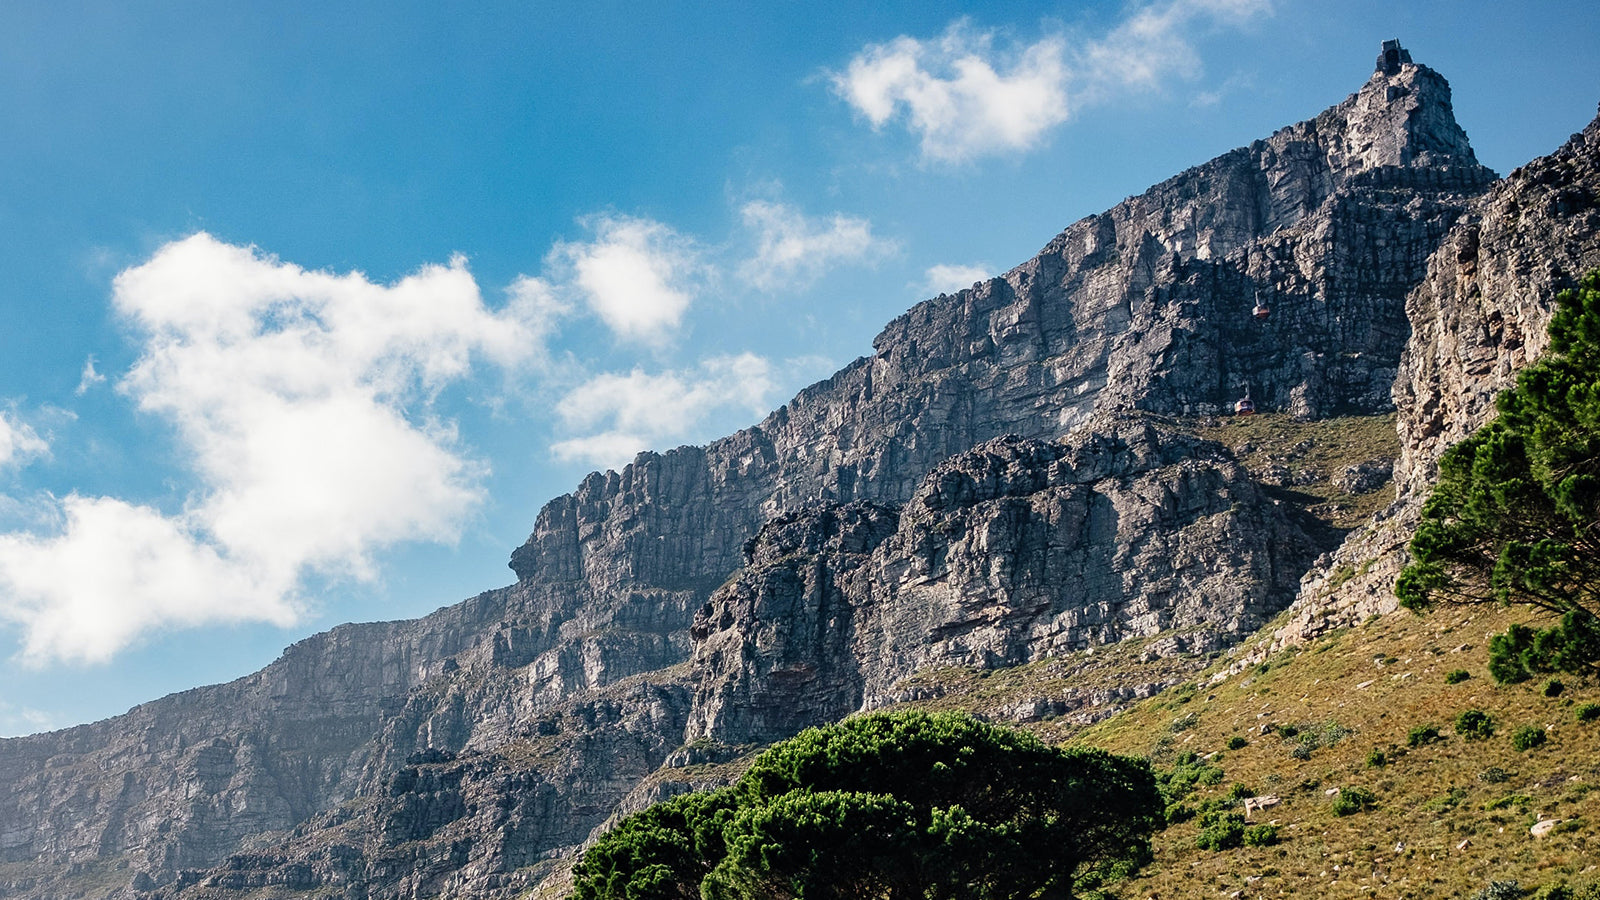 TOP 5 IDEAS FOR HOW TO PROPOSE ON TABLE MOUNTAIN - SHIMANSKY.CO.ZA